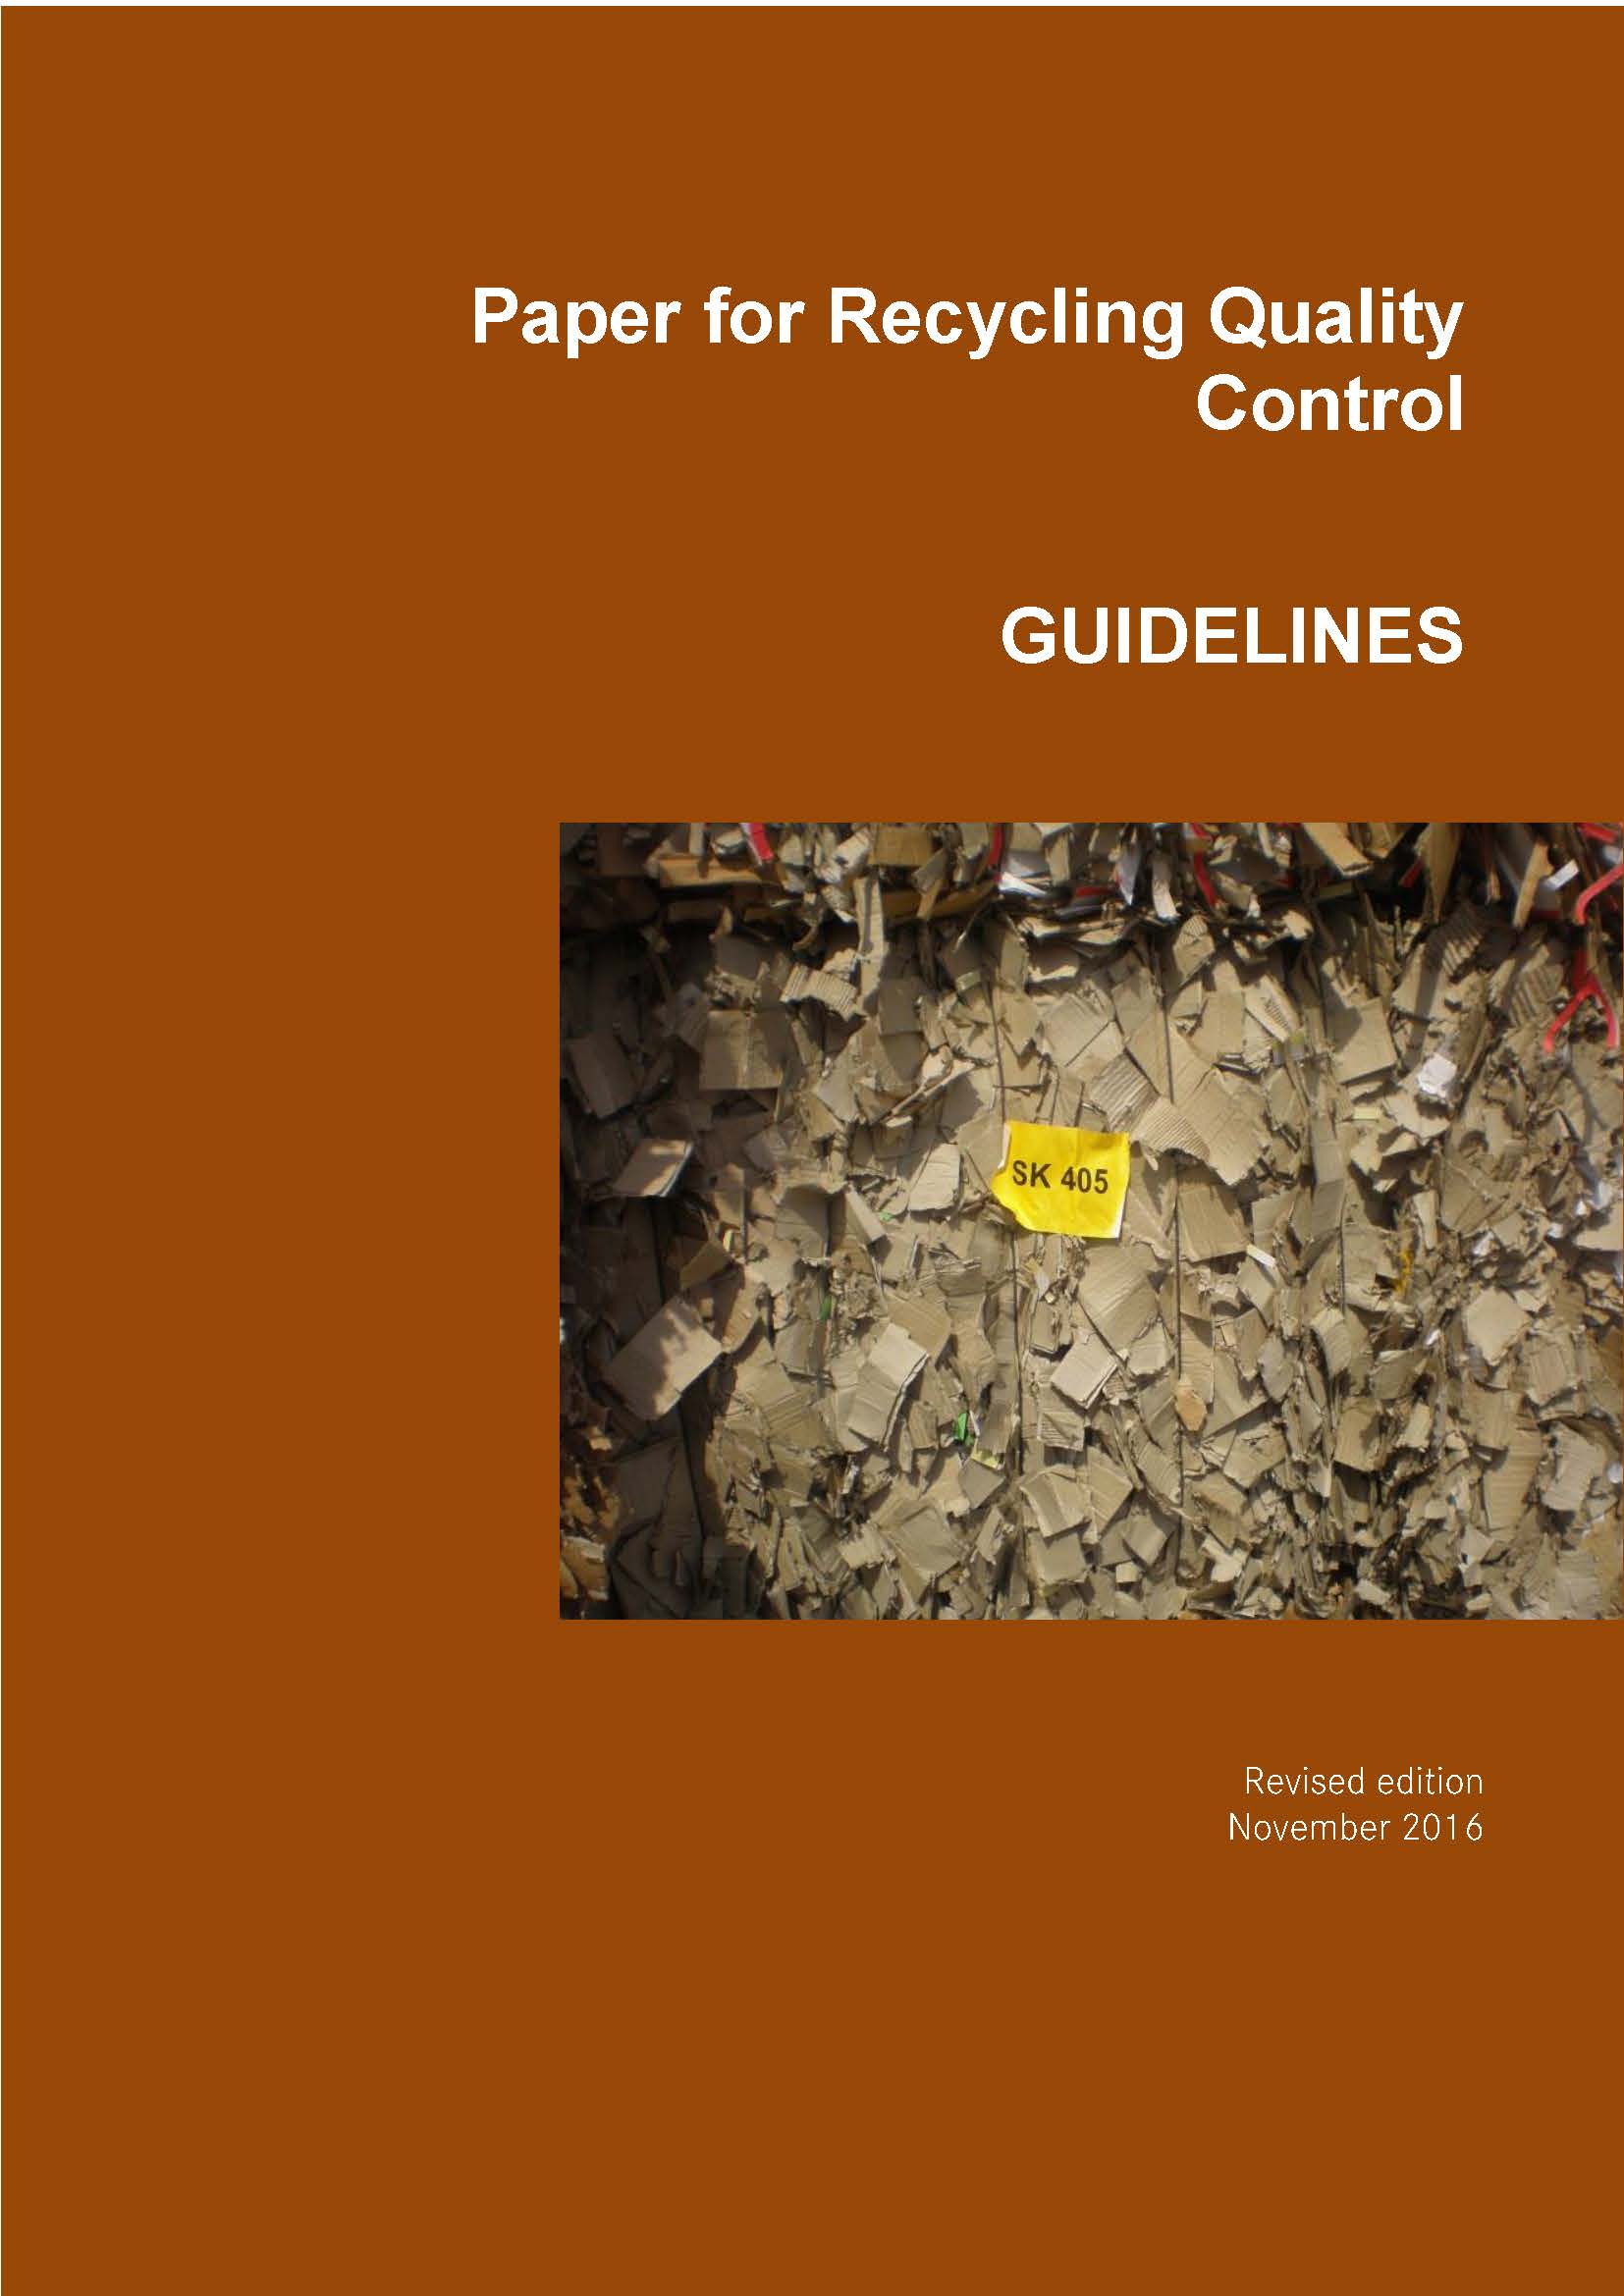 CEPI increases focus on technical measurement in revised Paper for Recycling Quality Control guidelines